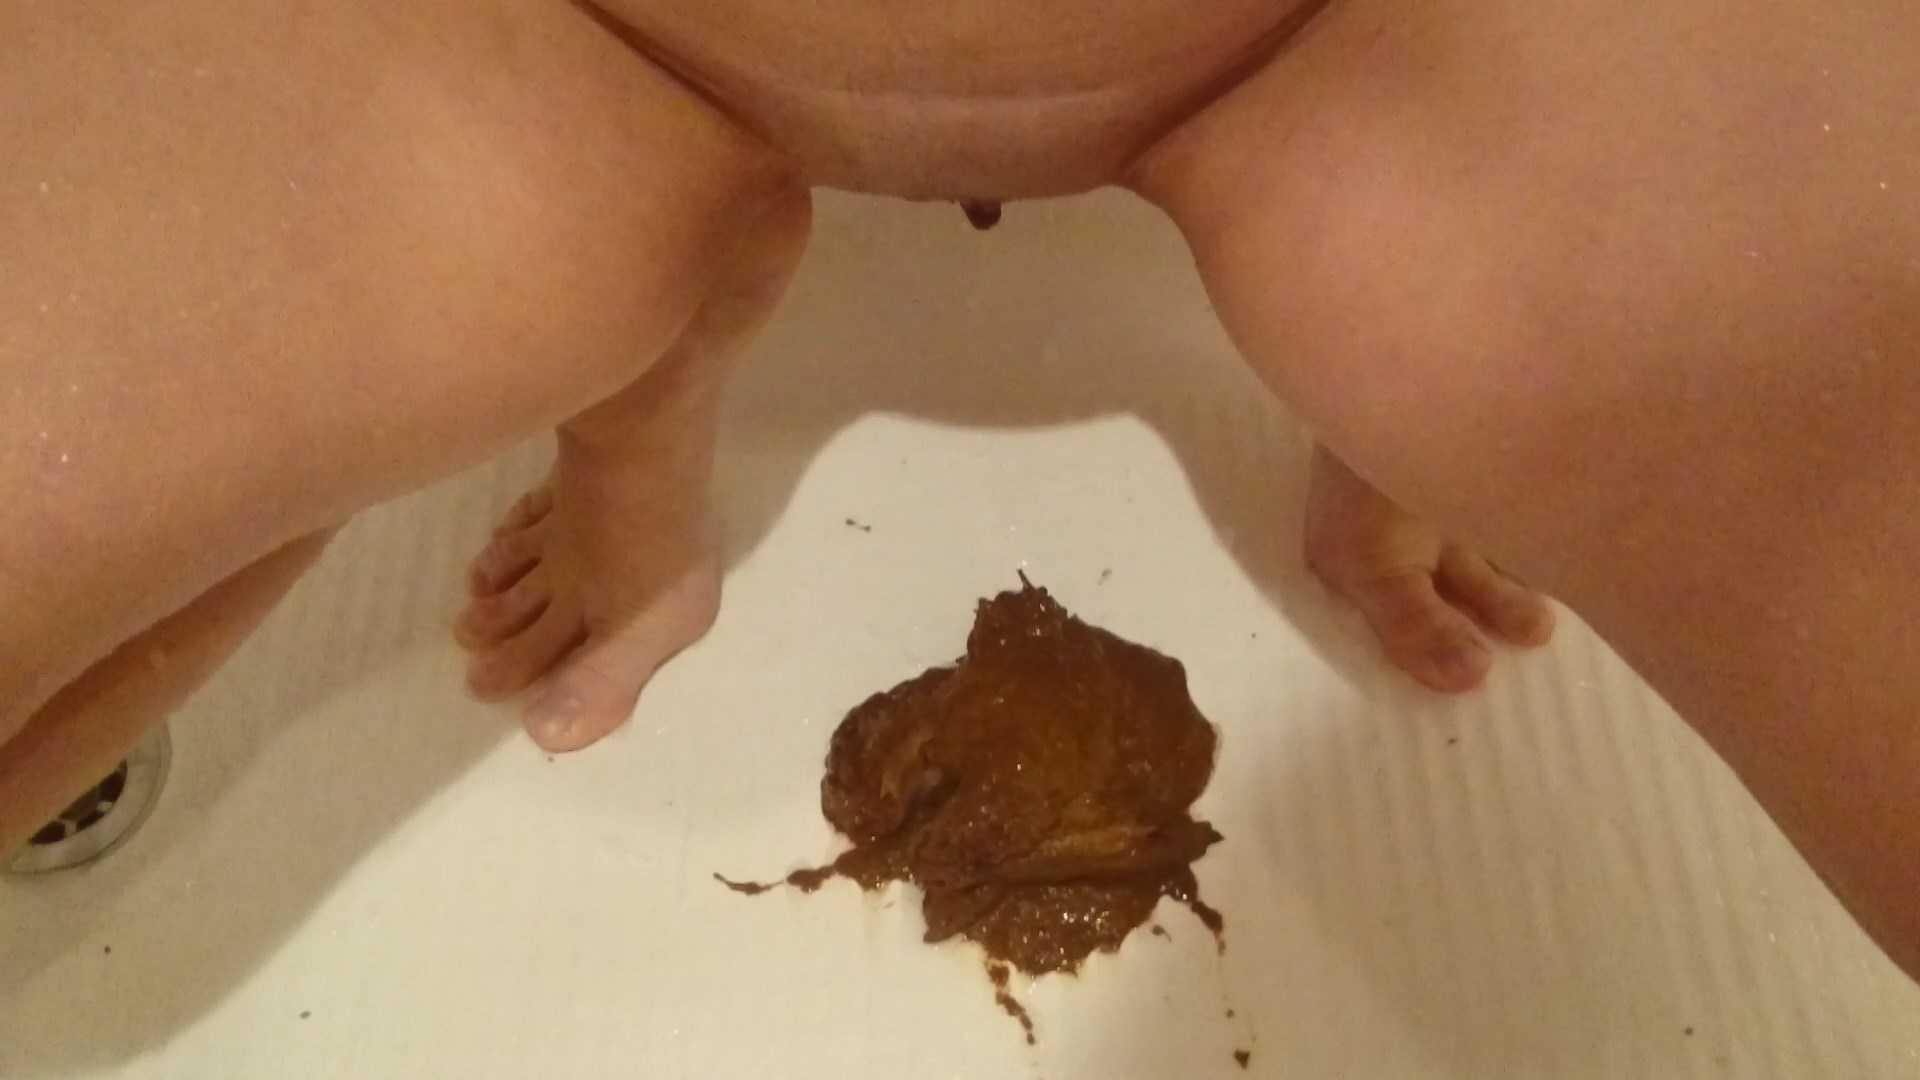 Sexy body is all covered with shit – Brown wife Full HD 1080p November 14, 2017 Perverted Porn Videos picture